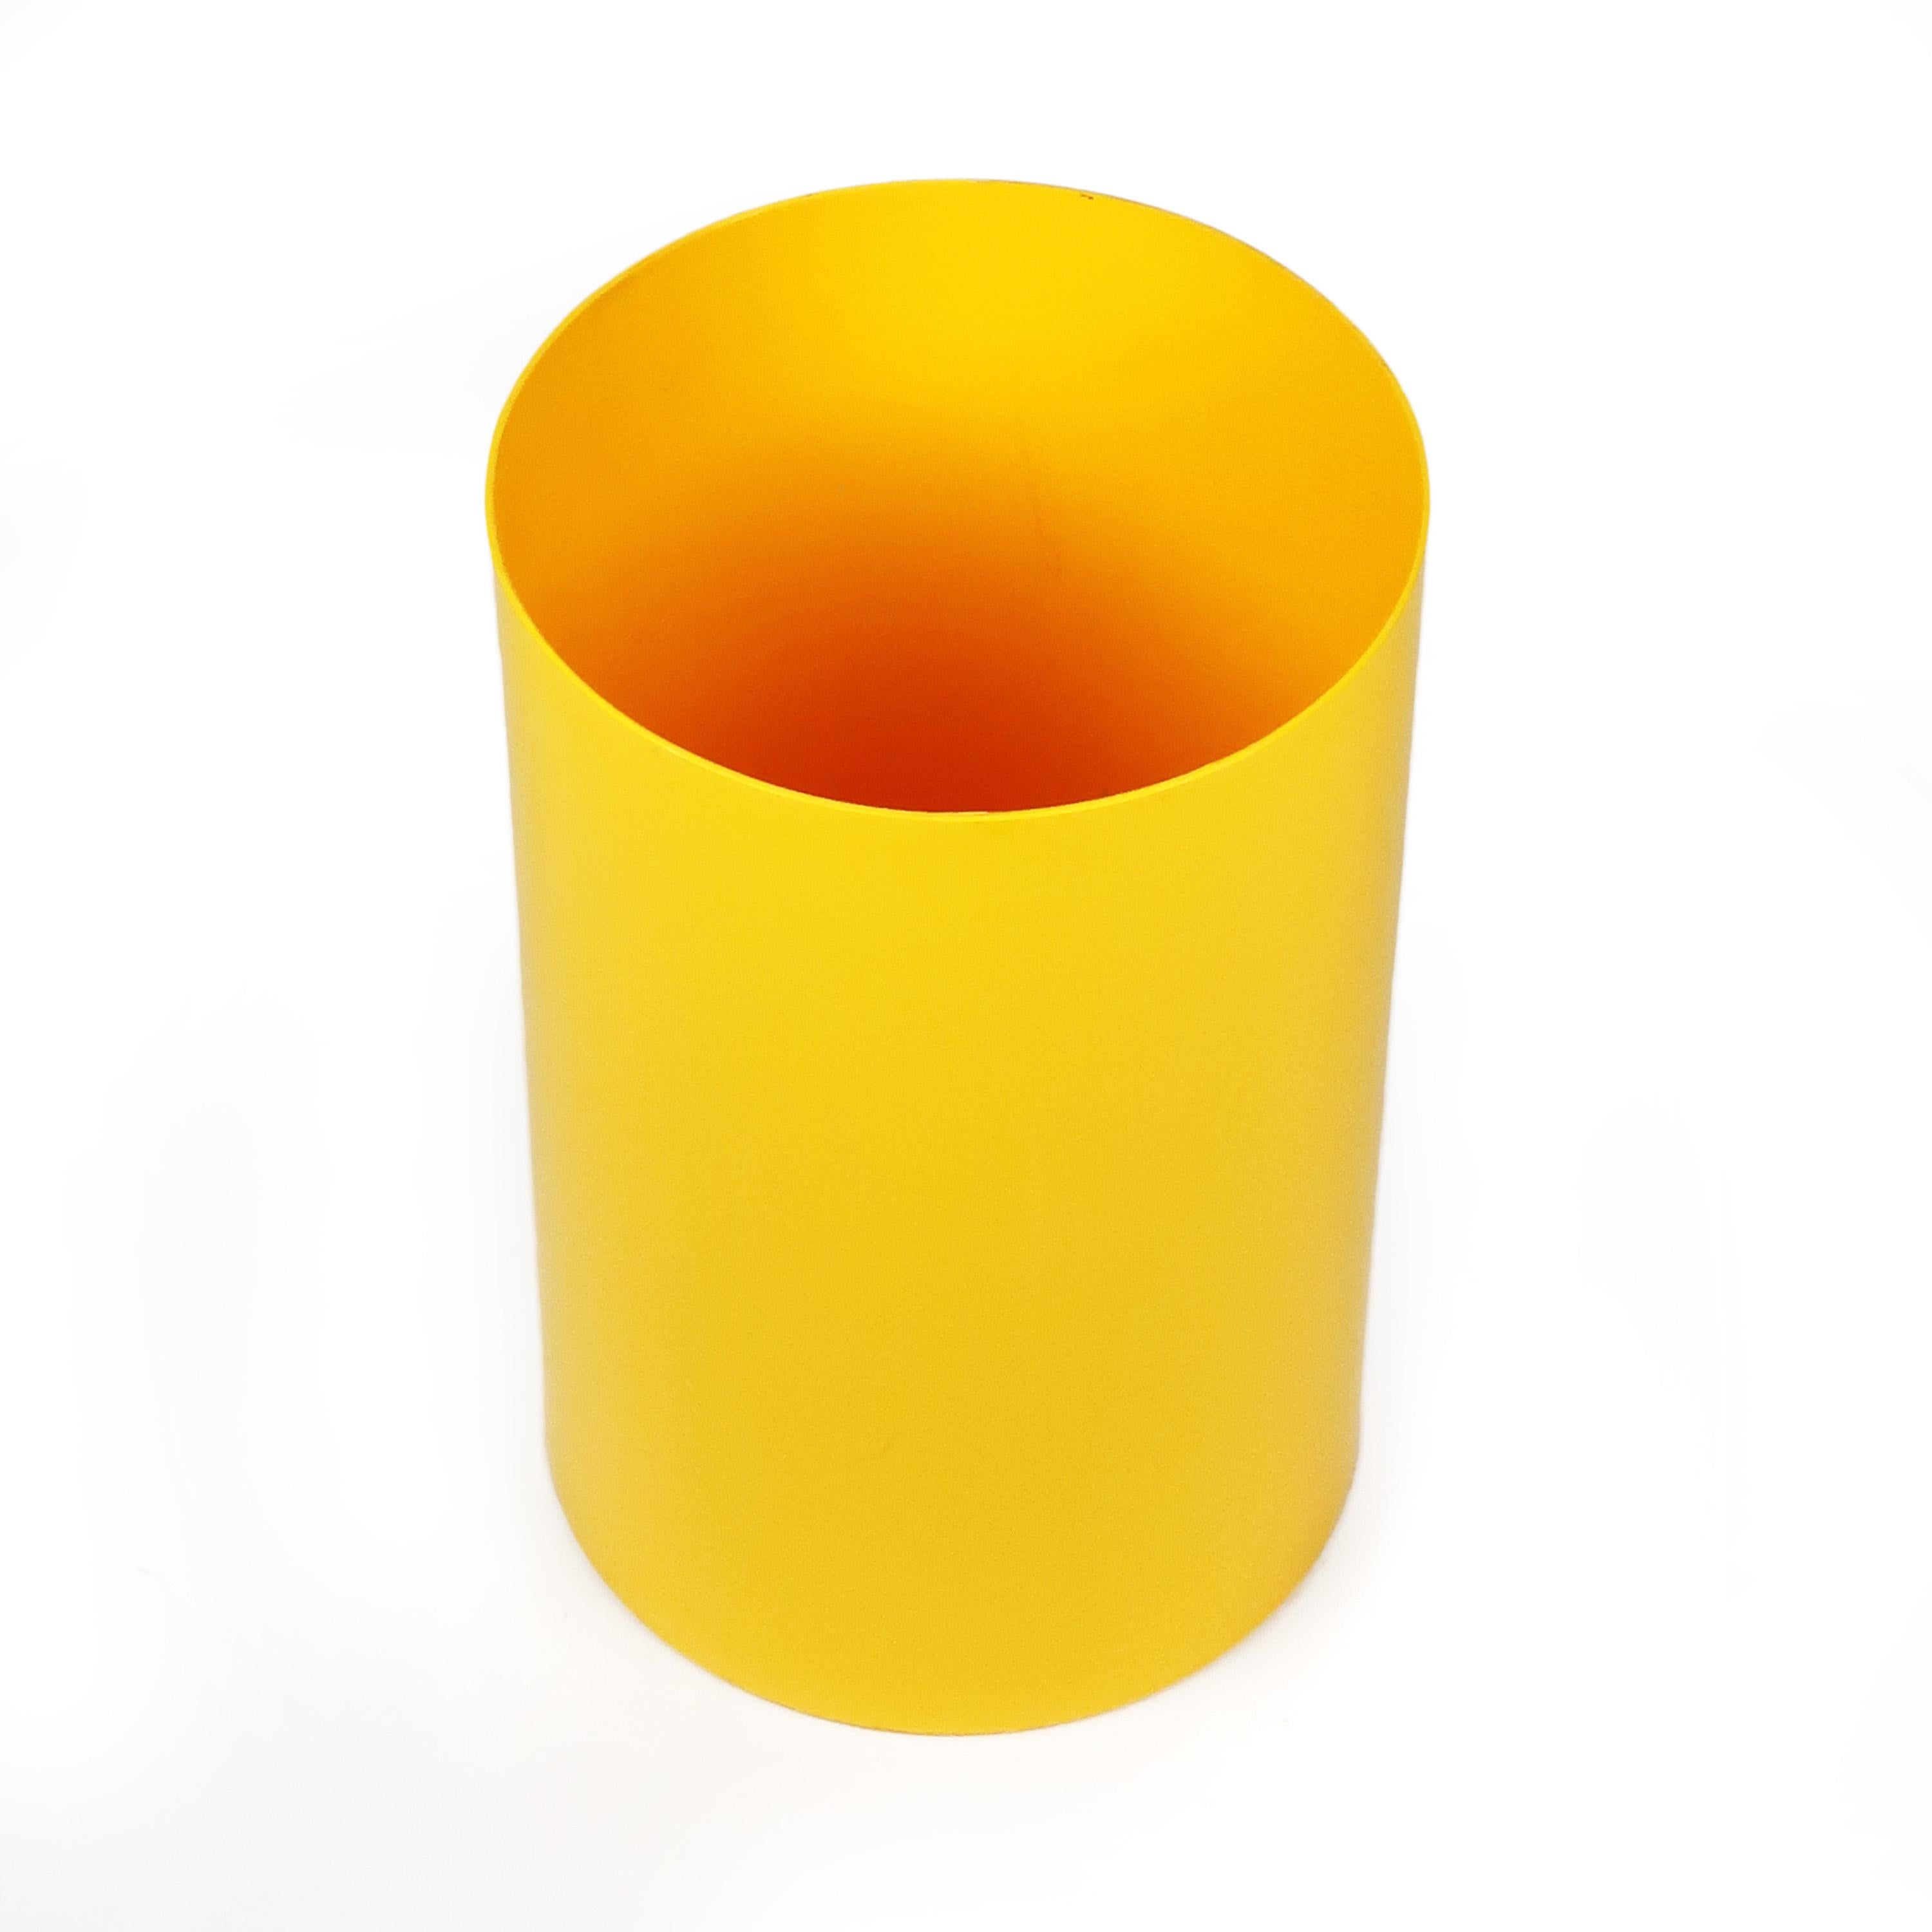 A vintage yellow acrylic trash can with a simple cylindrical form designed by Gino Colombini for Italian plastics manufacturer Kartell. 

Measures: 9.75